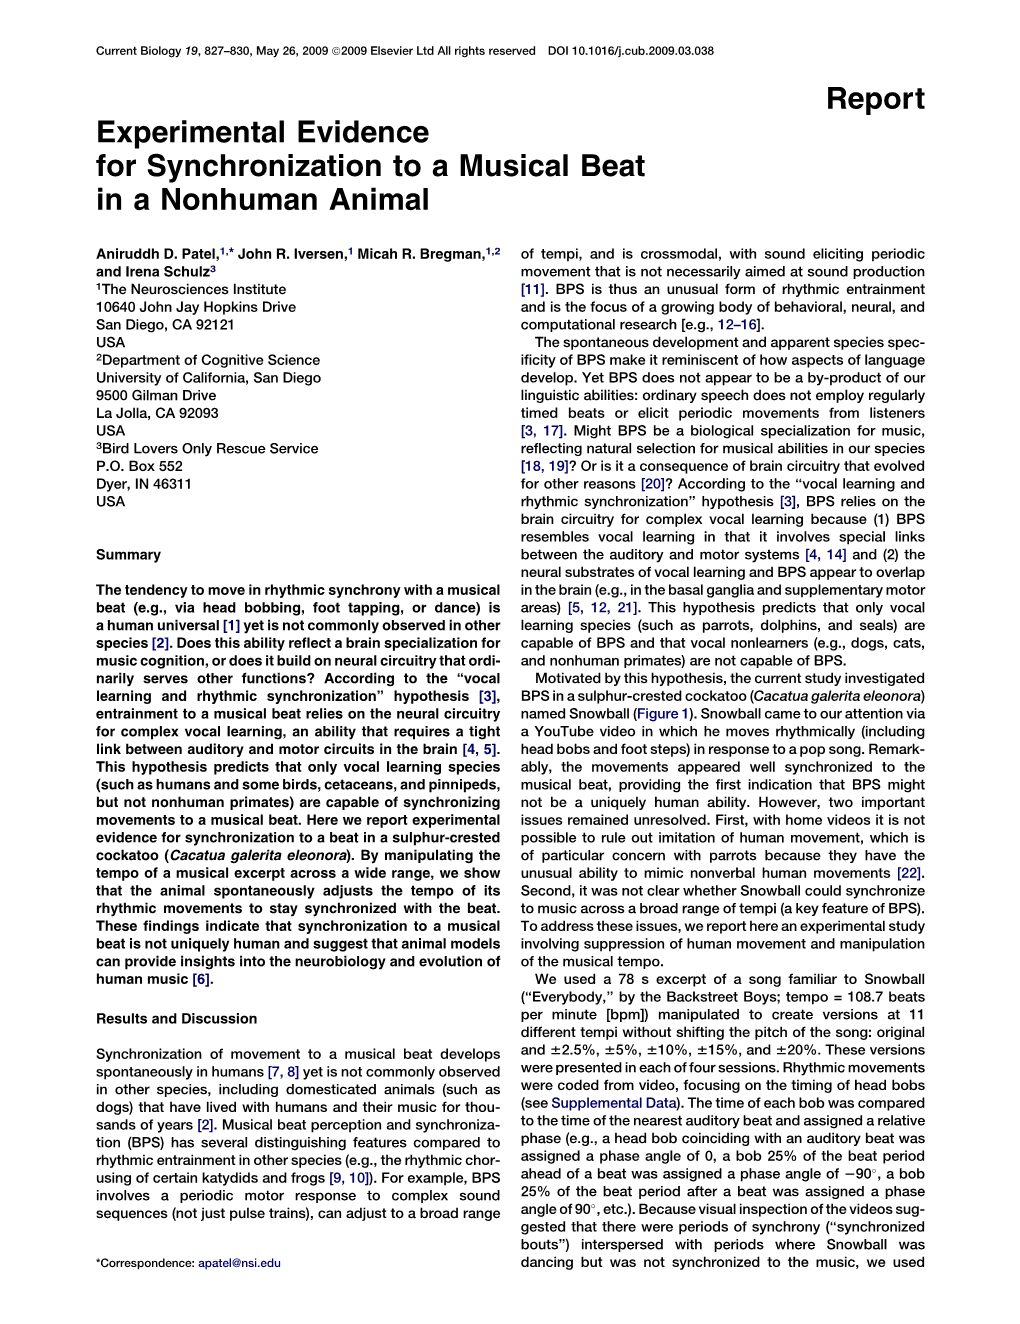 Experimental Evidence for Synchronization to a Musical Beat in a Nonhuman Animal